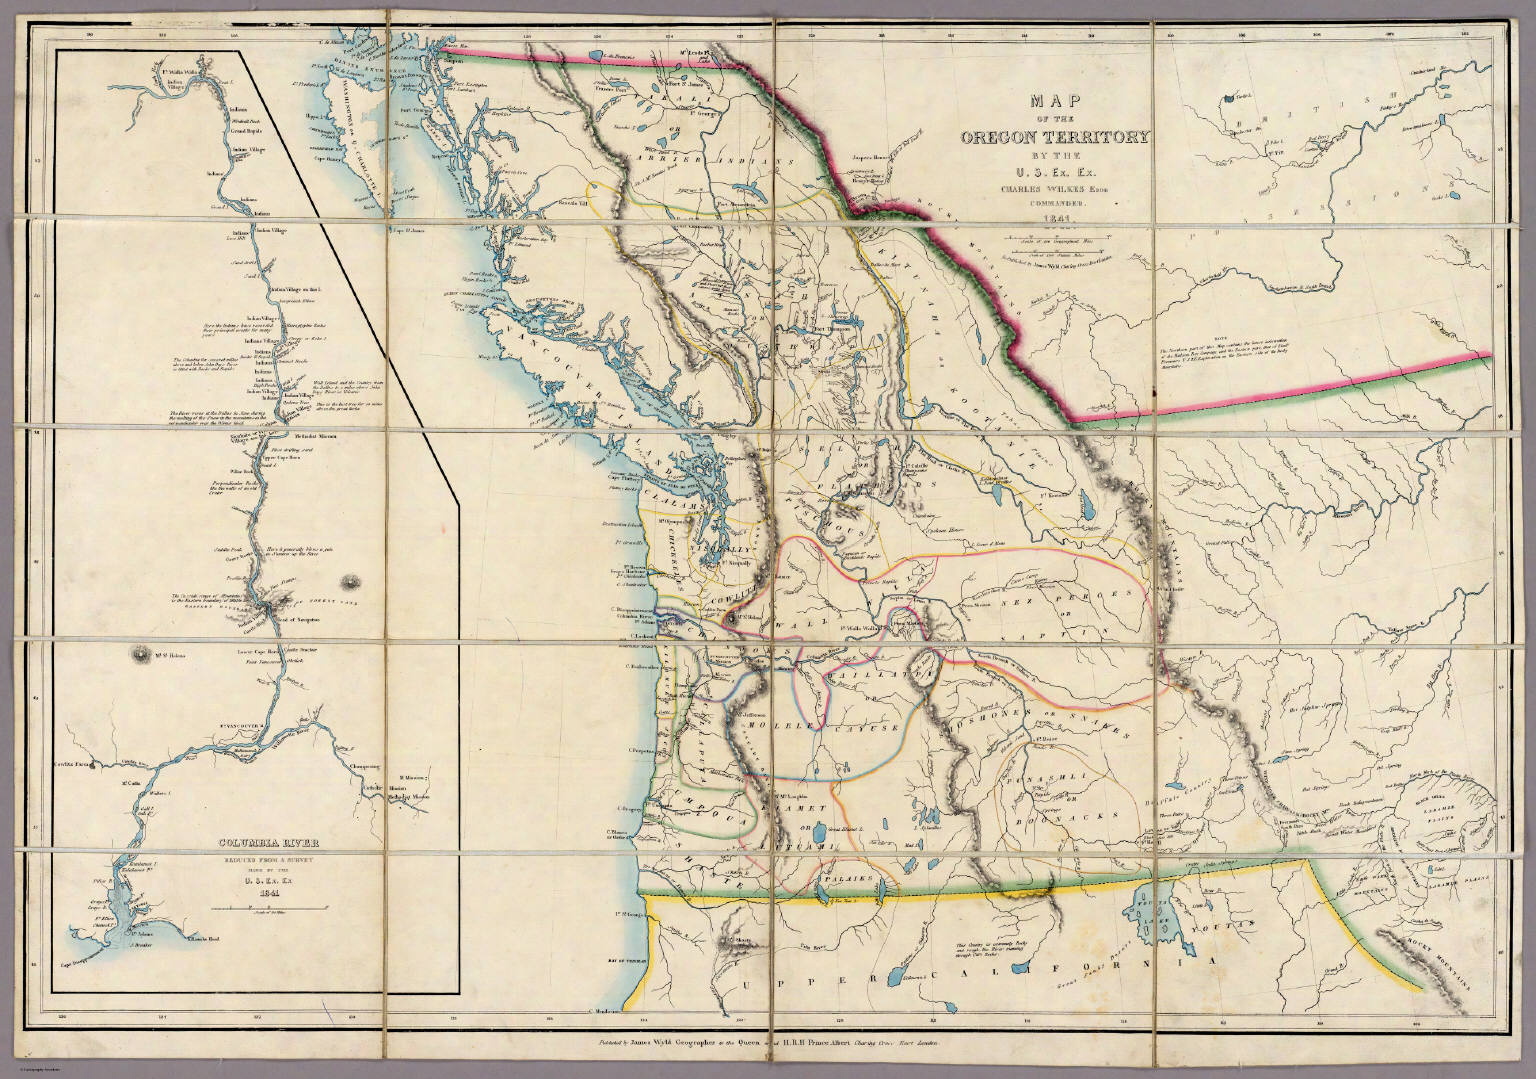 Map of the Oregon Territory - David Rumsey Historical Map Collection